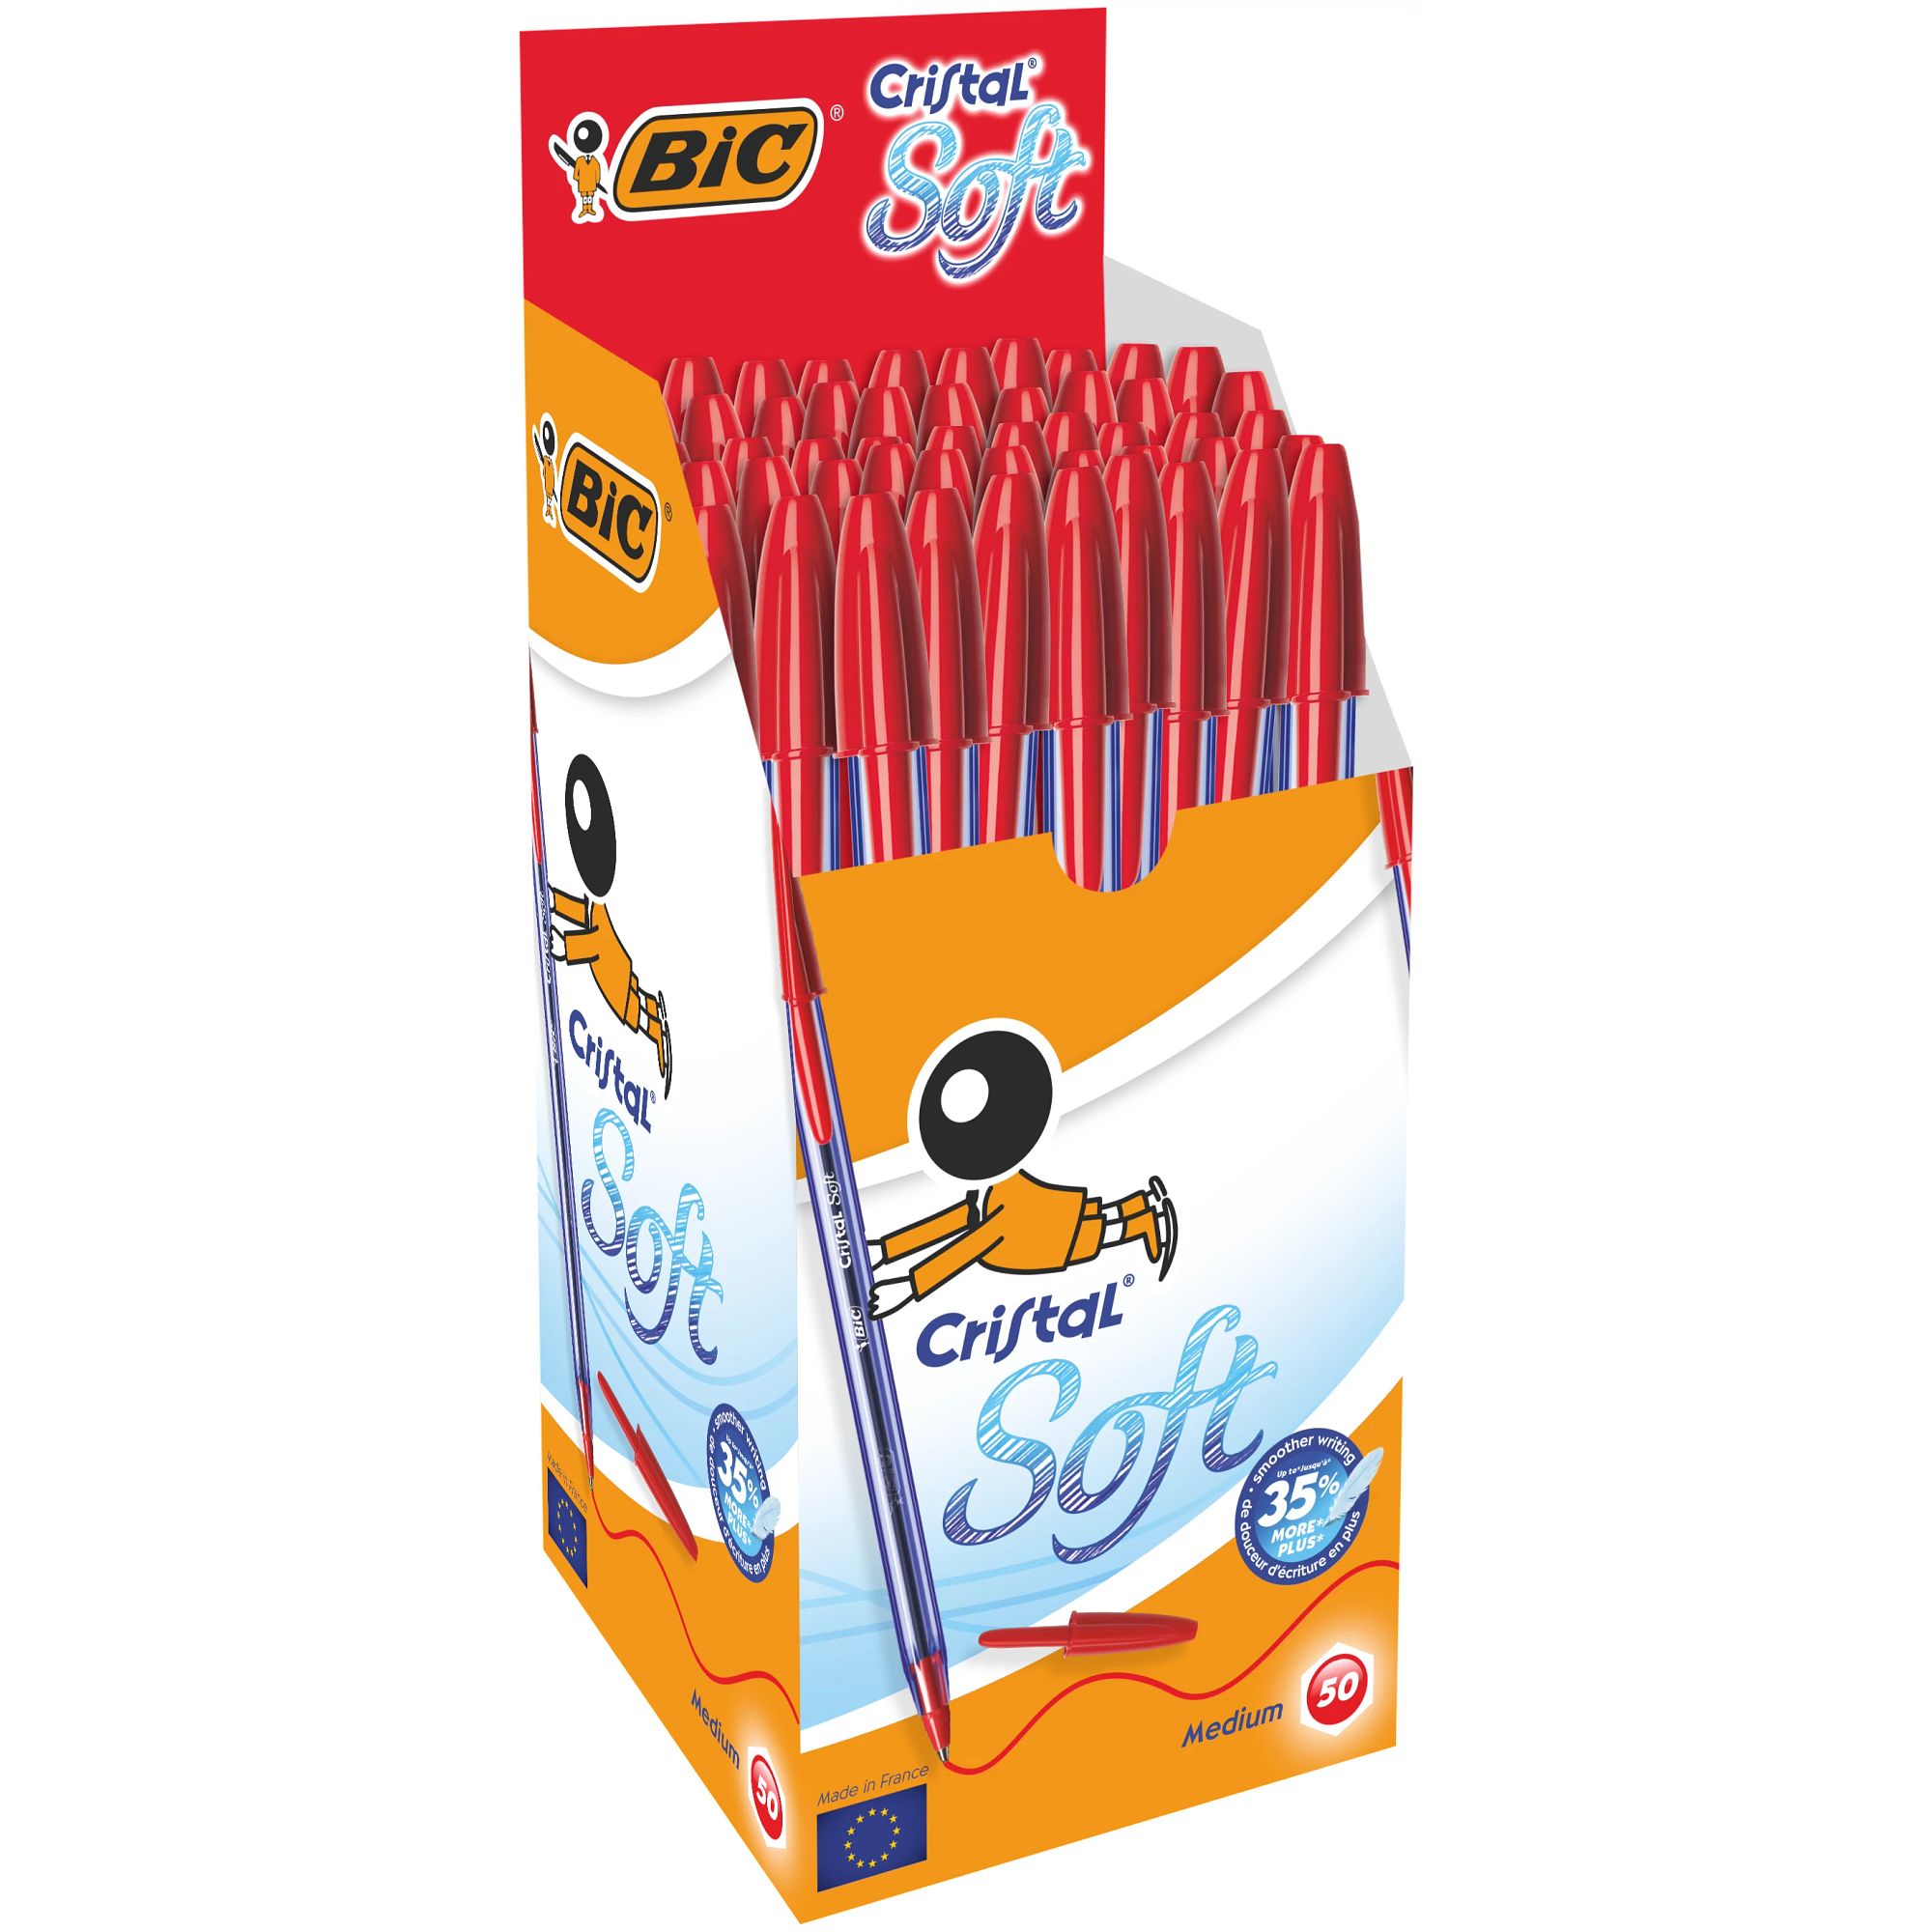 HP053881AB - BIC Cristal Soft - Pack of 50 - Red